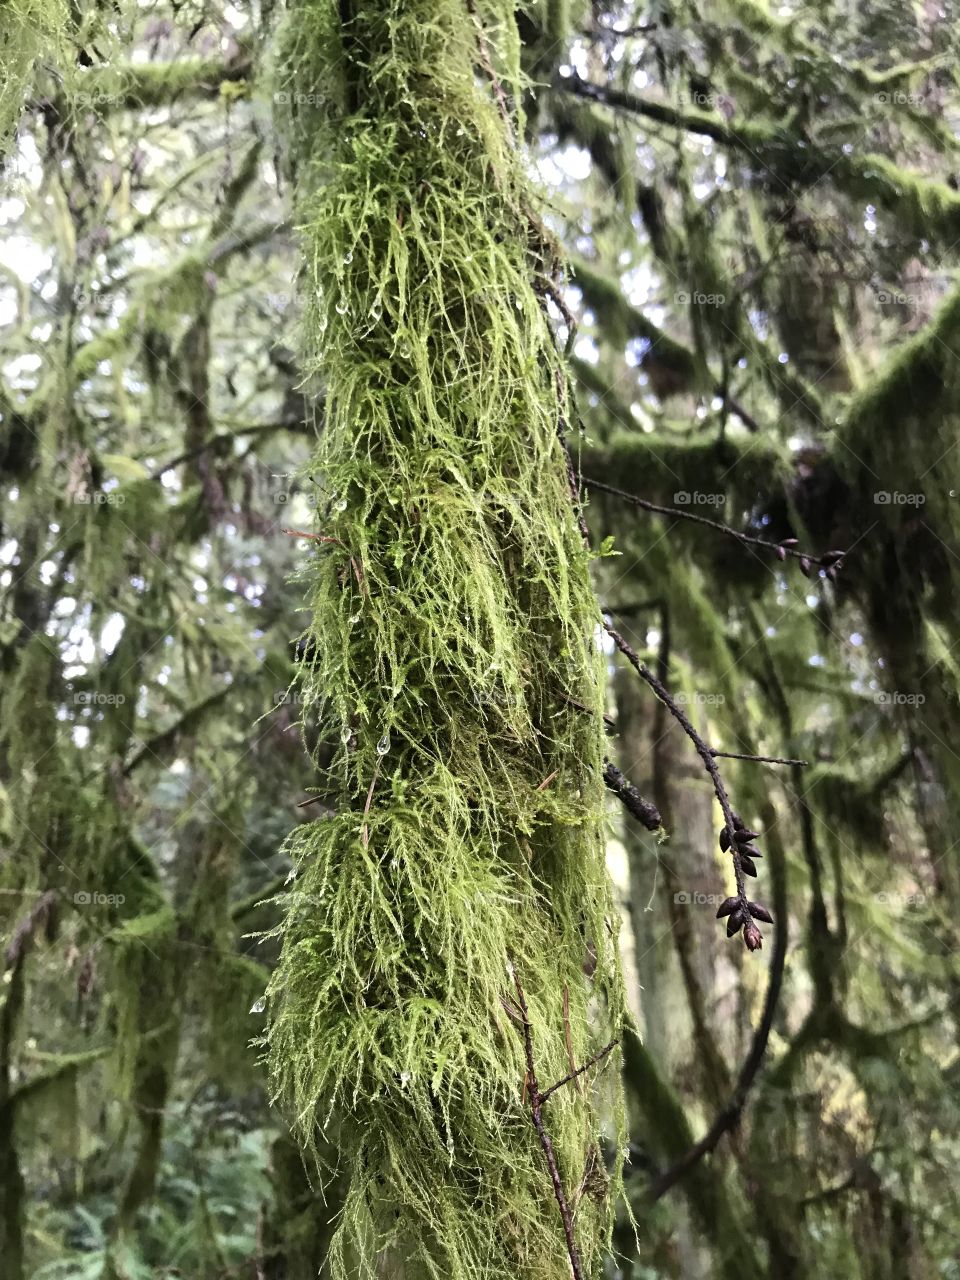 PNW moss with early morning water droplets! 